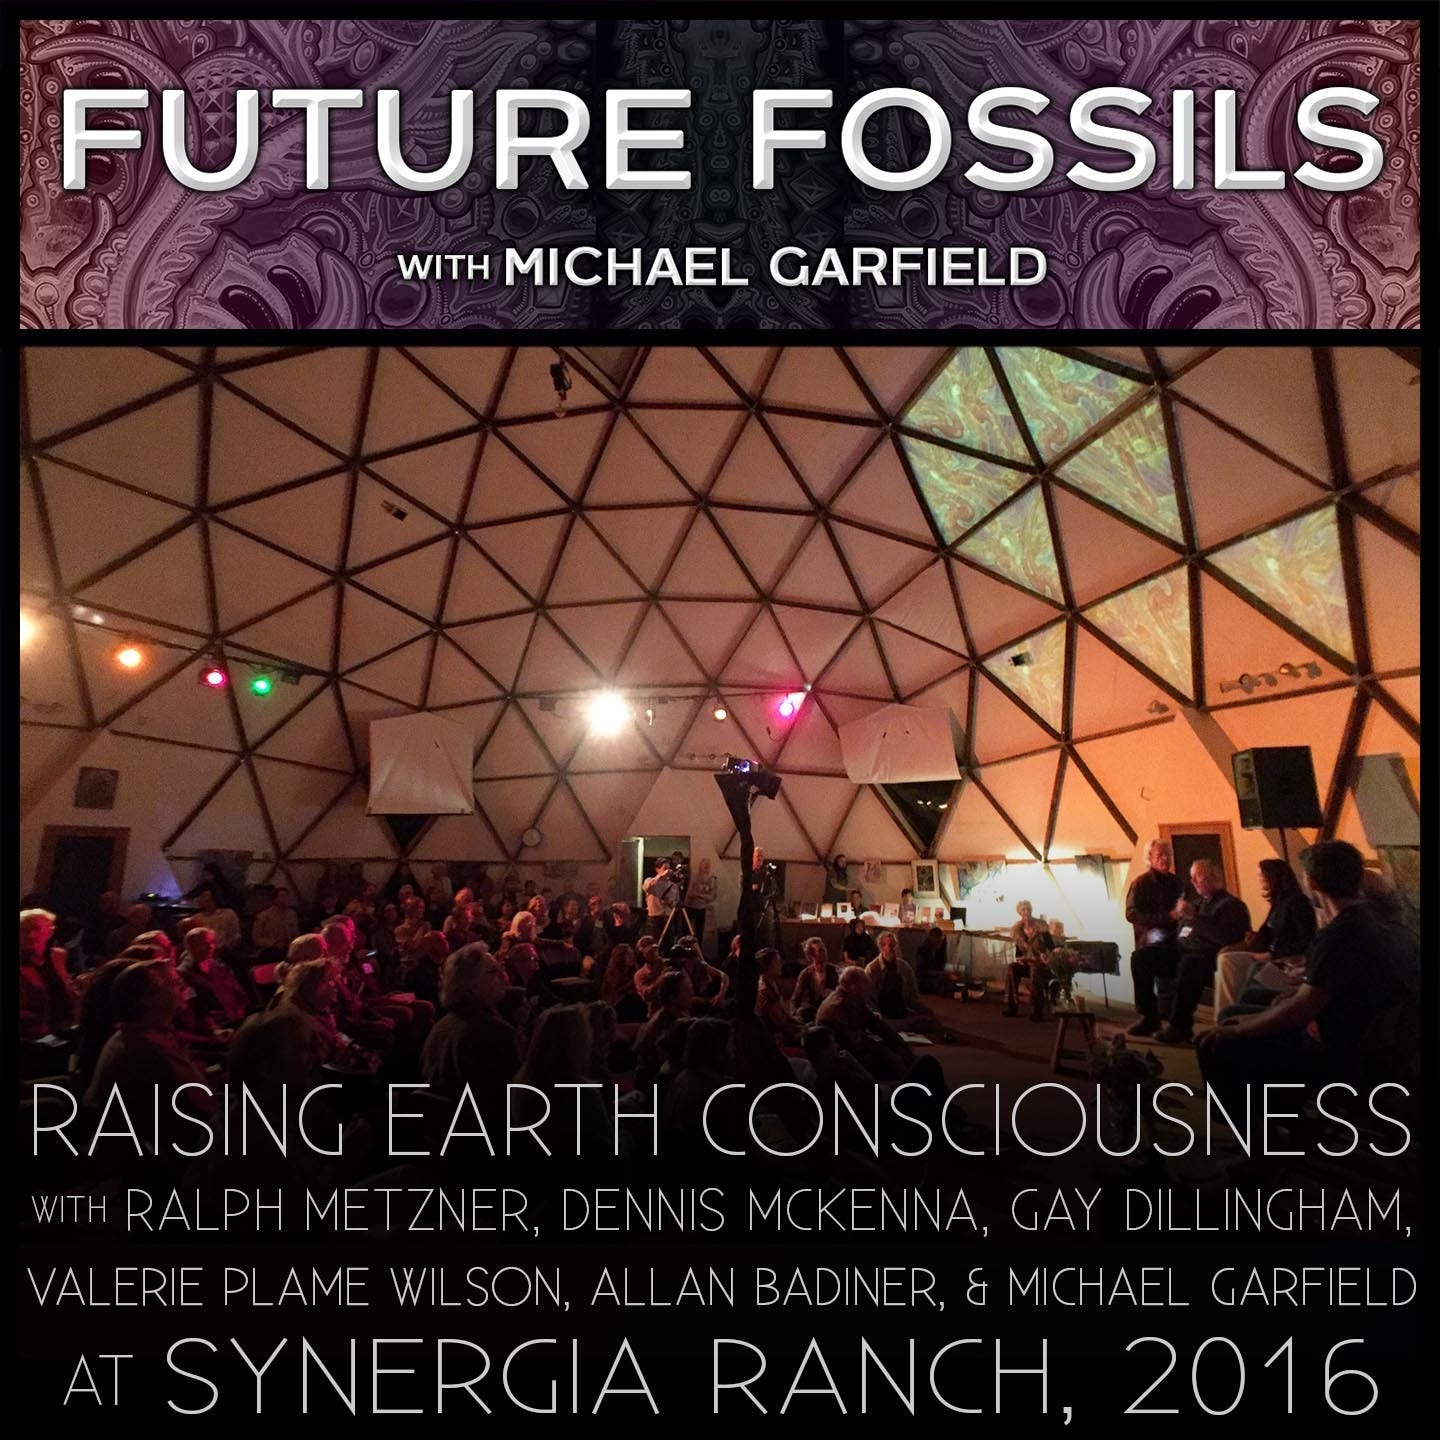 146 - Raising Earth Consciousness with Ralph Metzner, Dennis McKenna, Gay Dillingham, Valerie Plame Wilson, Allan Badiner, and Michael Garfield at Synergia Ranch, April 2016